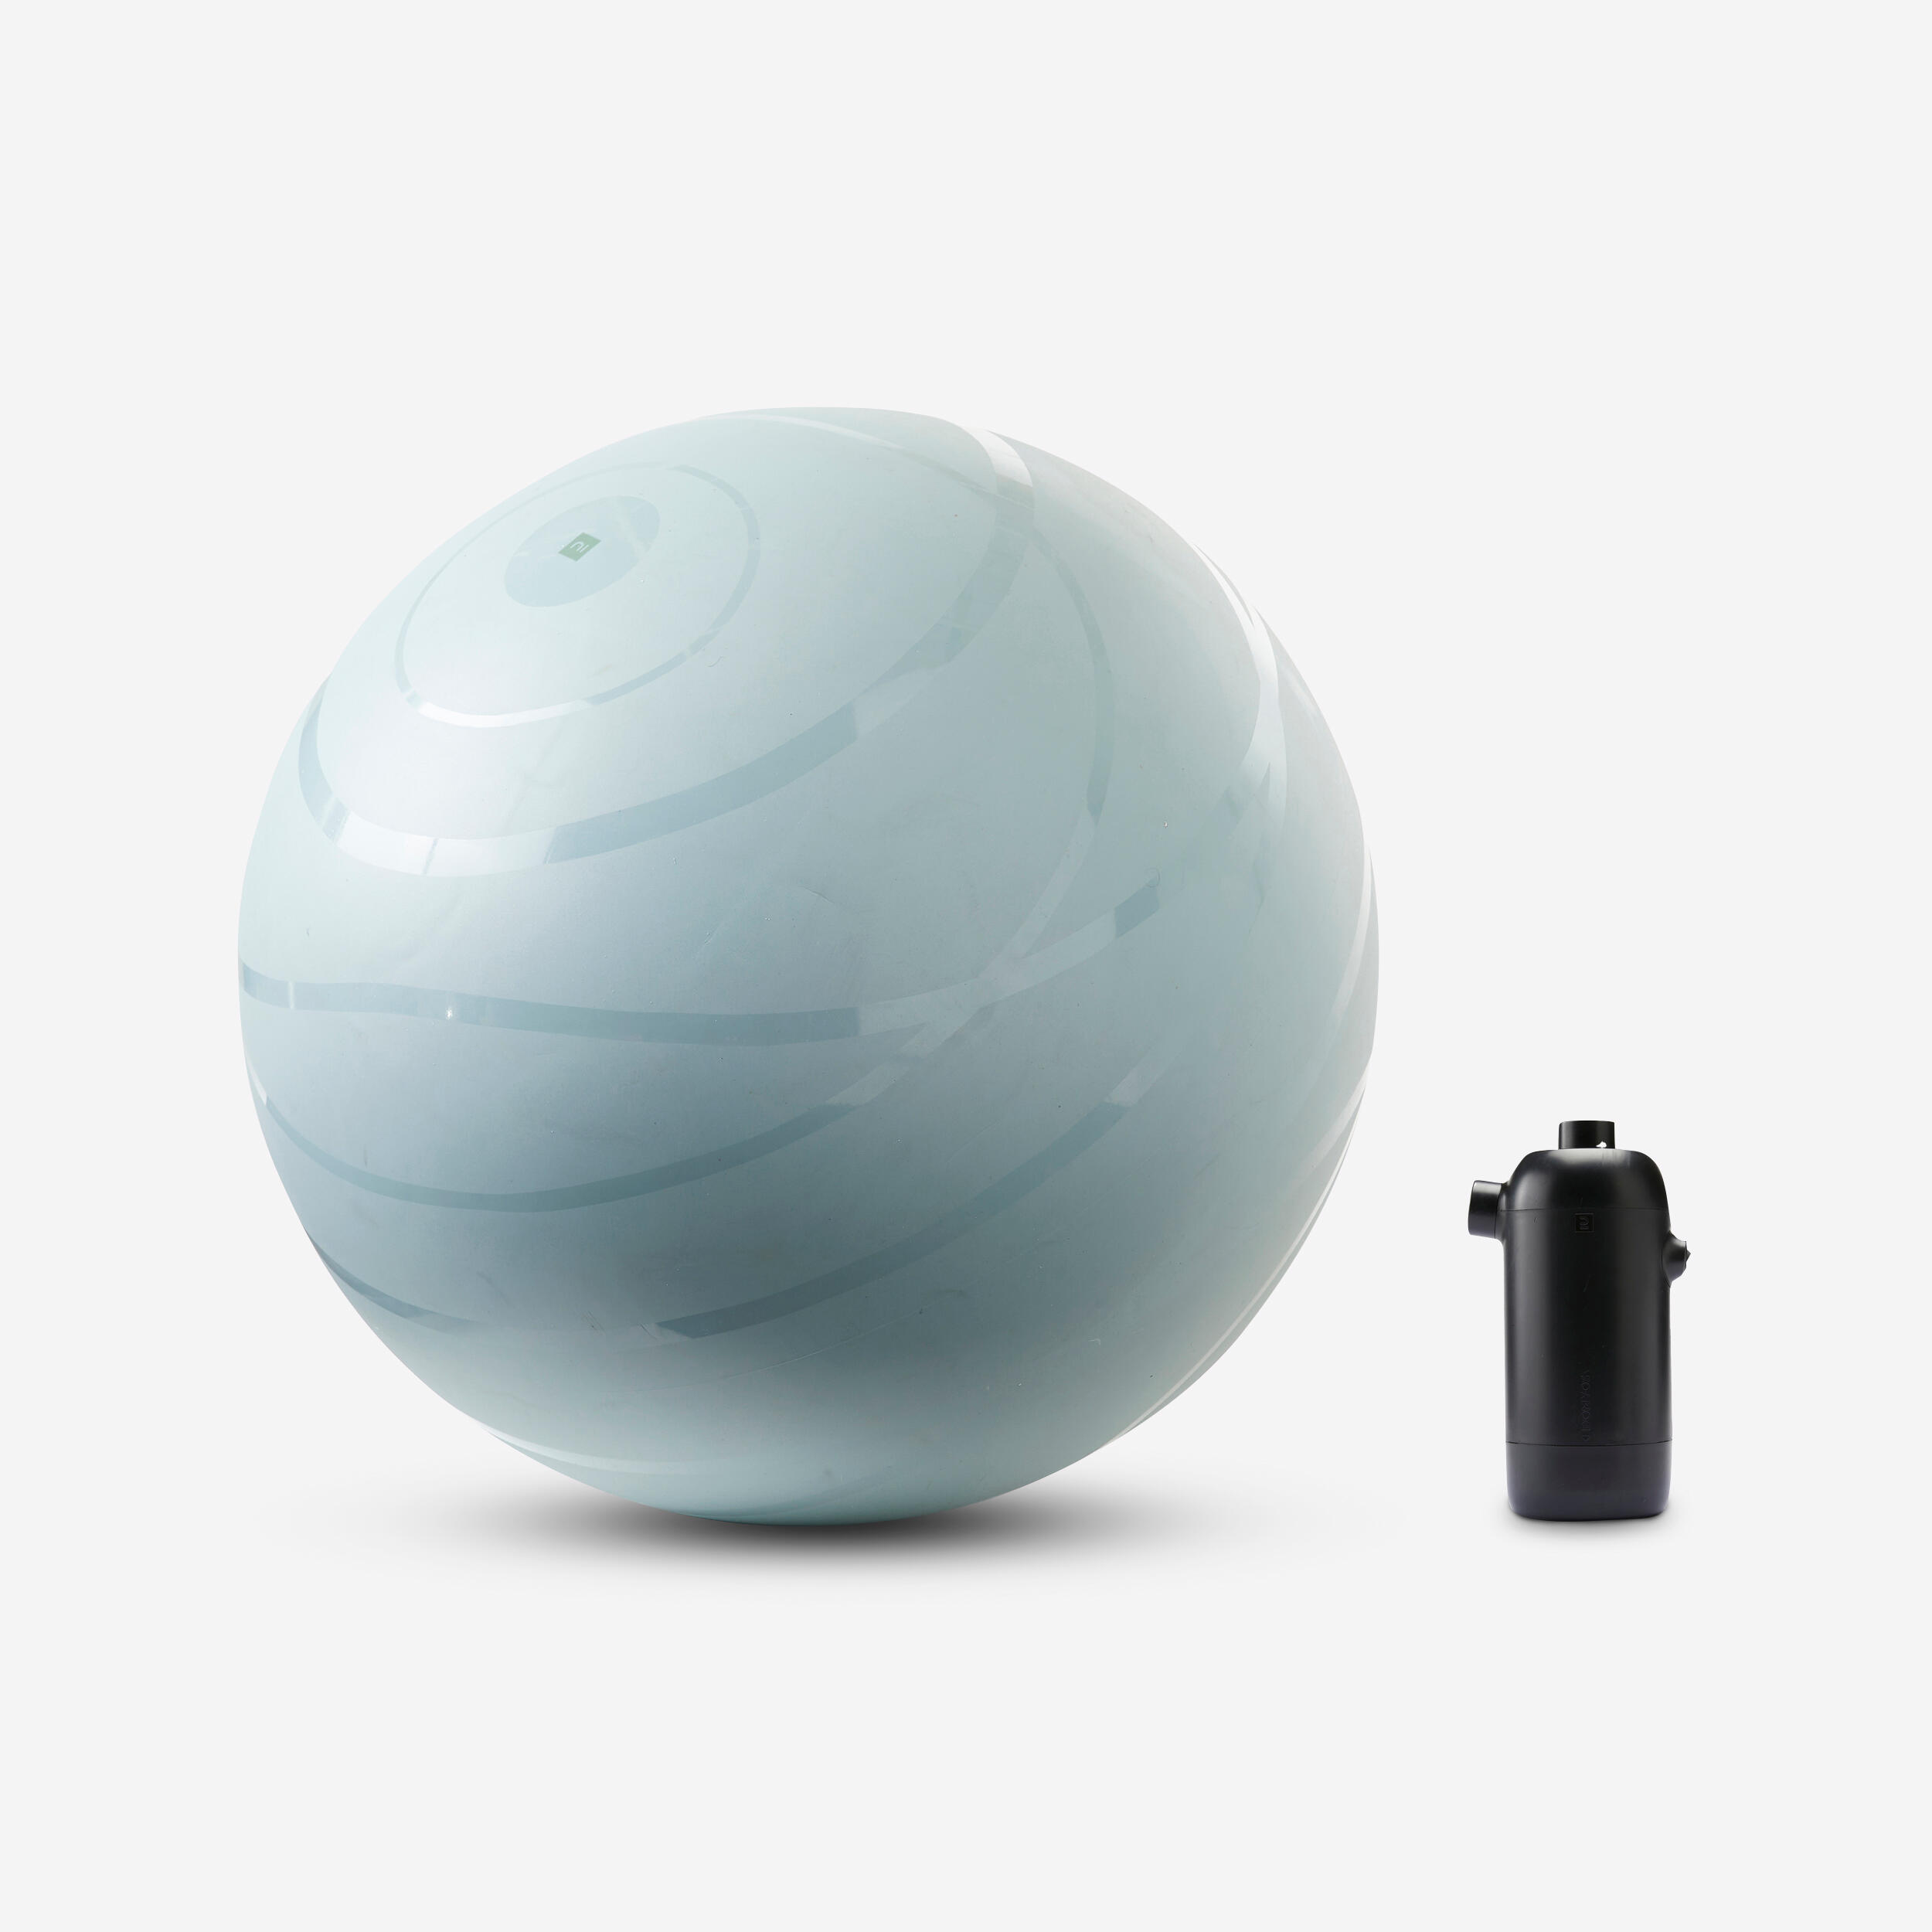 Gym Ball with Pump Included for Quick Inflation/Deflation Size 2/65 cm 1/9